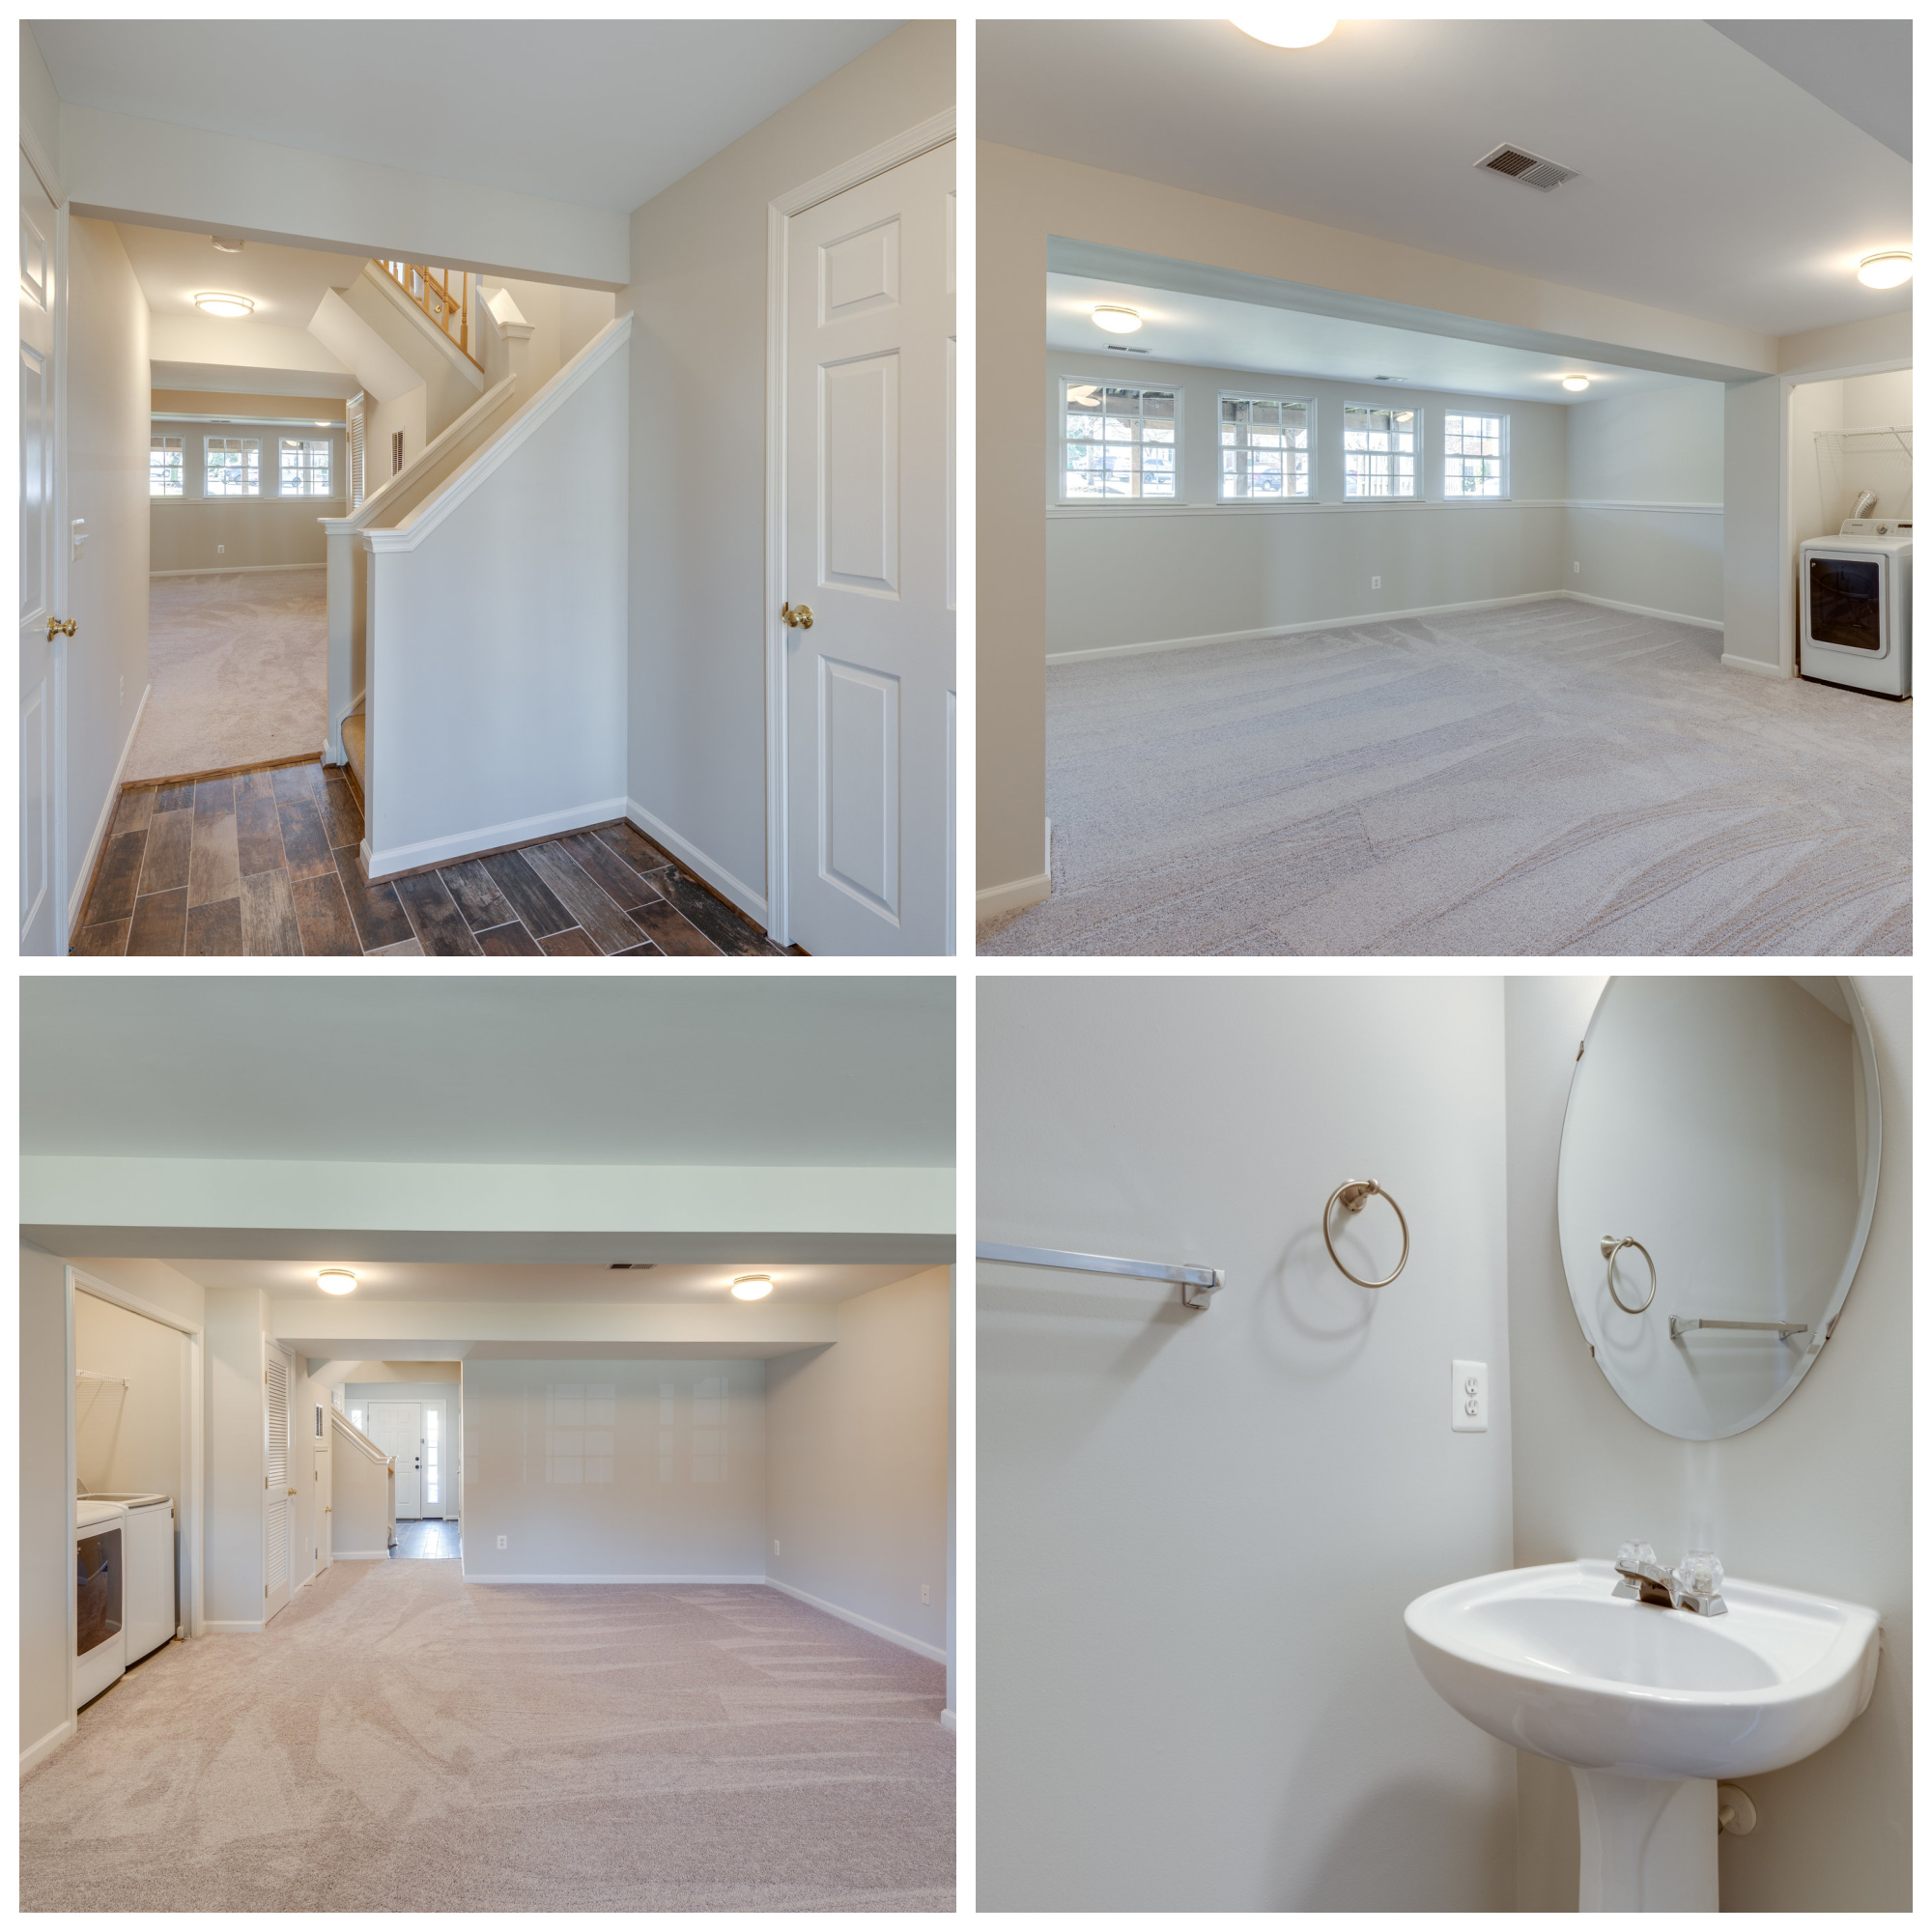 115 Shadwell Ter SE, Leesburg- Entry Level